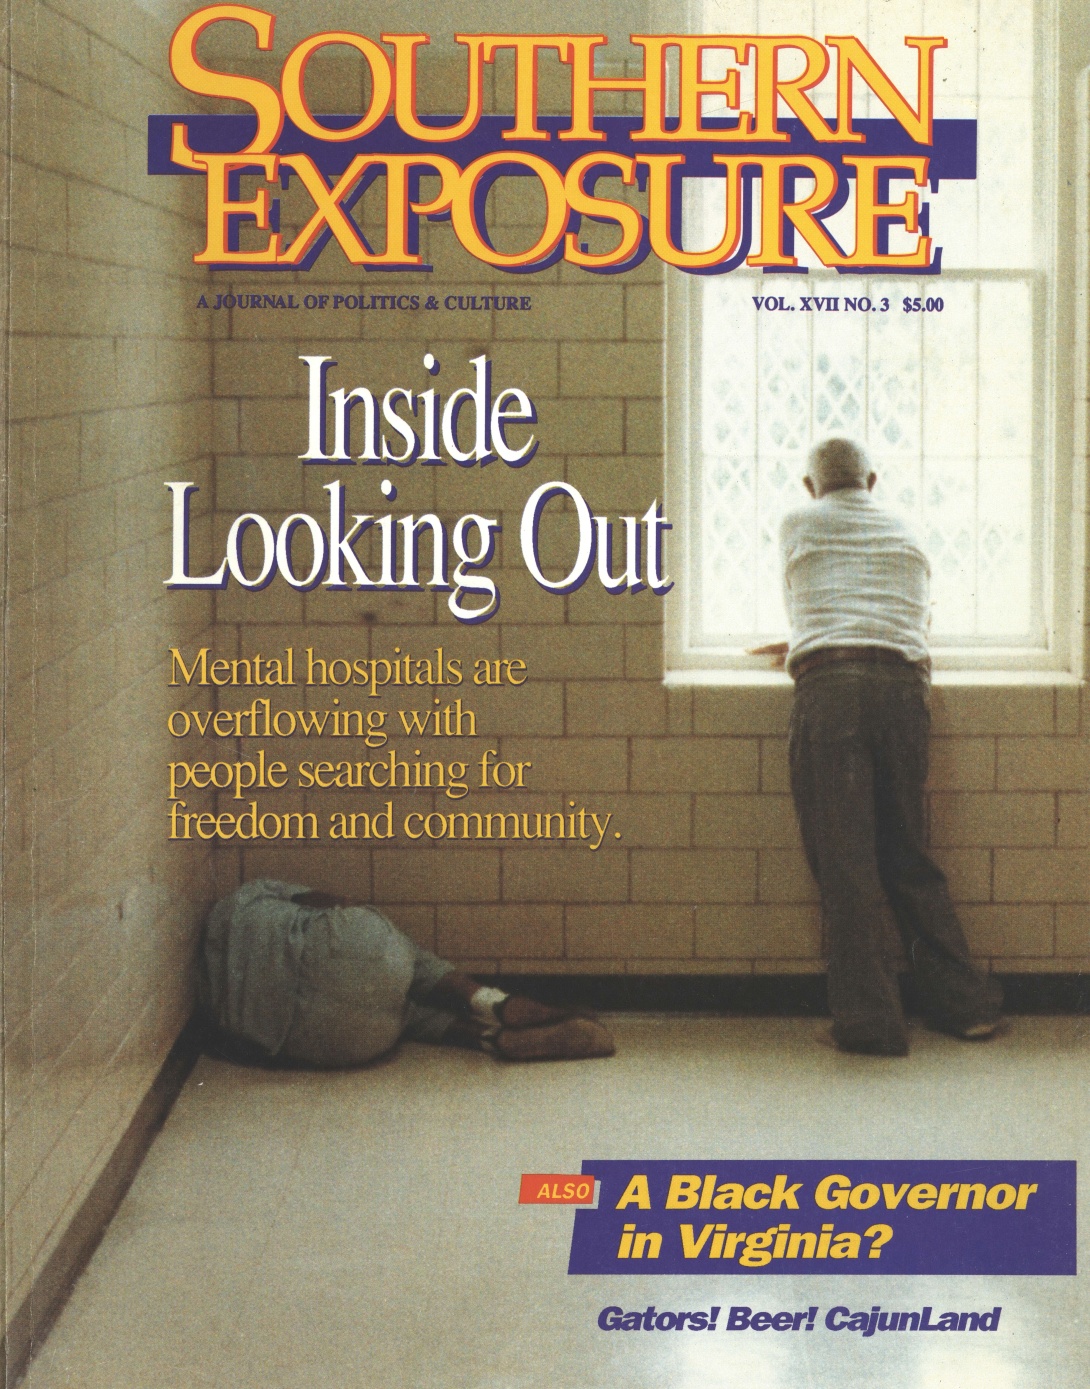 Magazine cover with man in cement room looking out window, while another man is huddled in the corner.